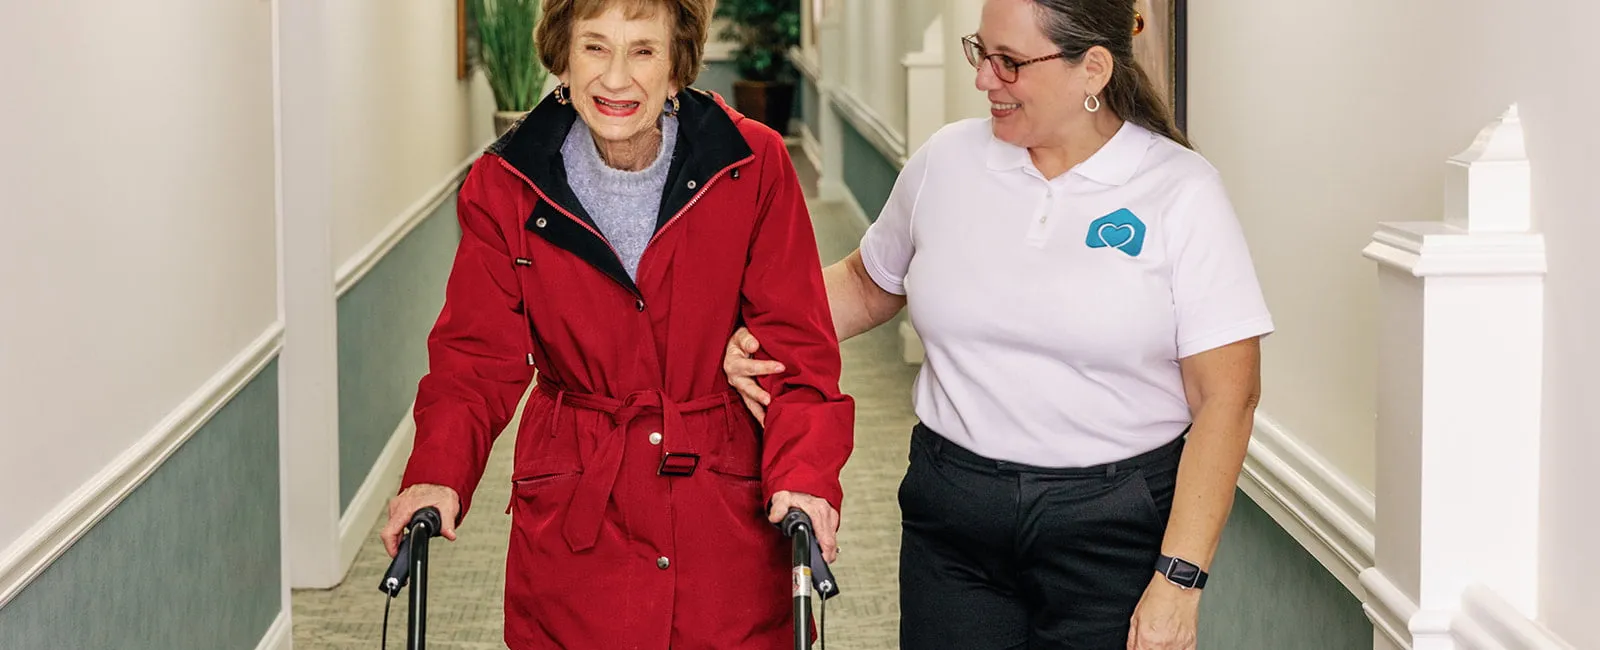 Discover the Best Home Health Care Agency for Your Loved One